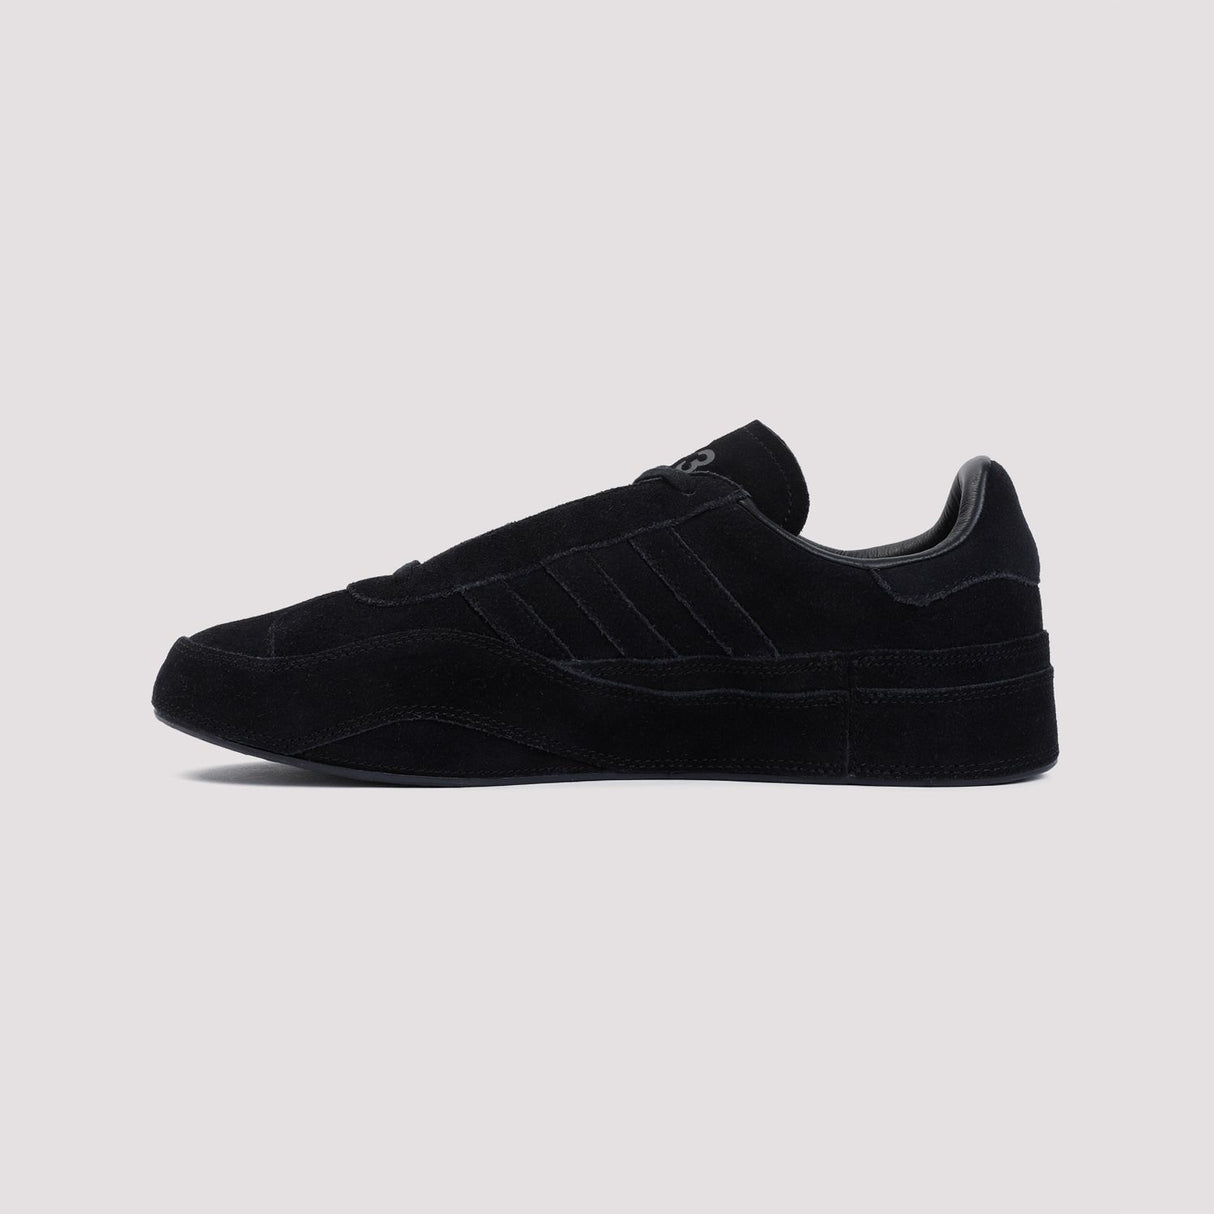 Y-3 Men's SS24 Black Suede Sneakers with 100% Suede and Rubber Material